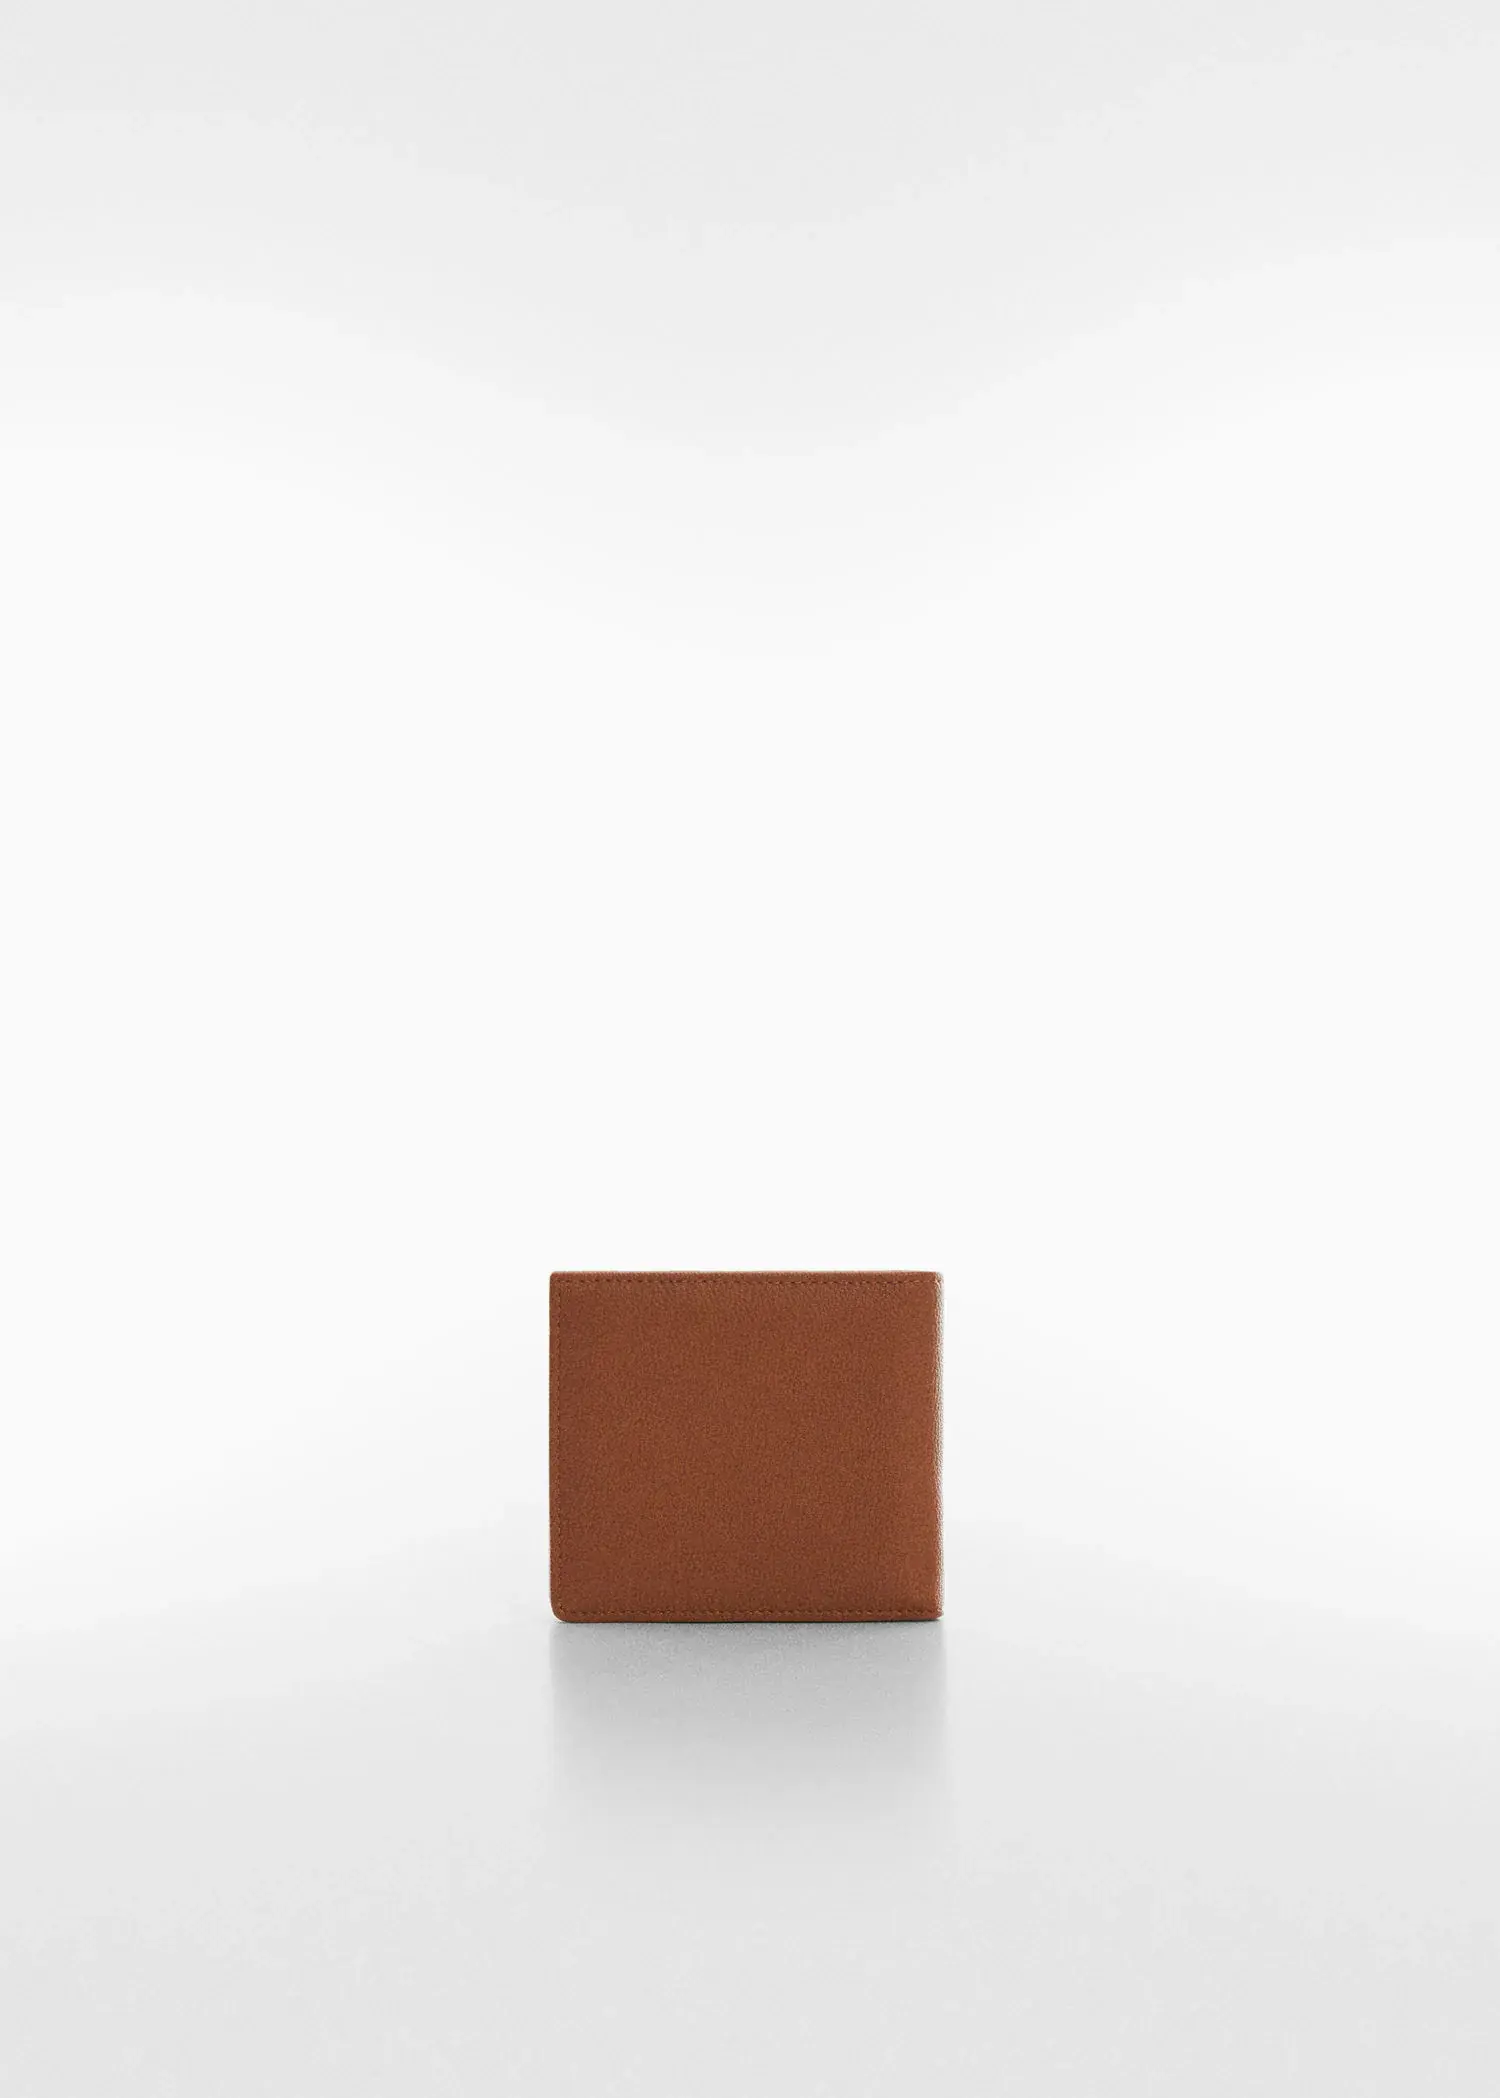 Mango Anti-contactless wallet. a brown square object on top of a white surface. 